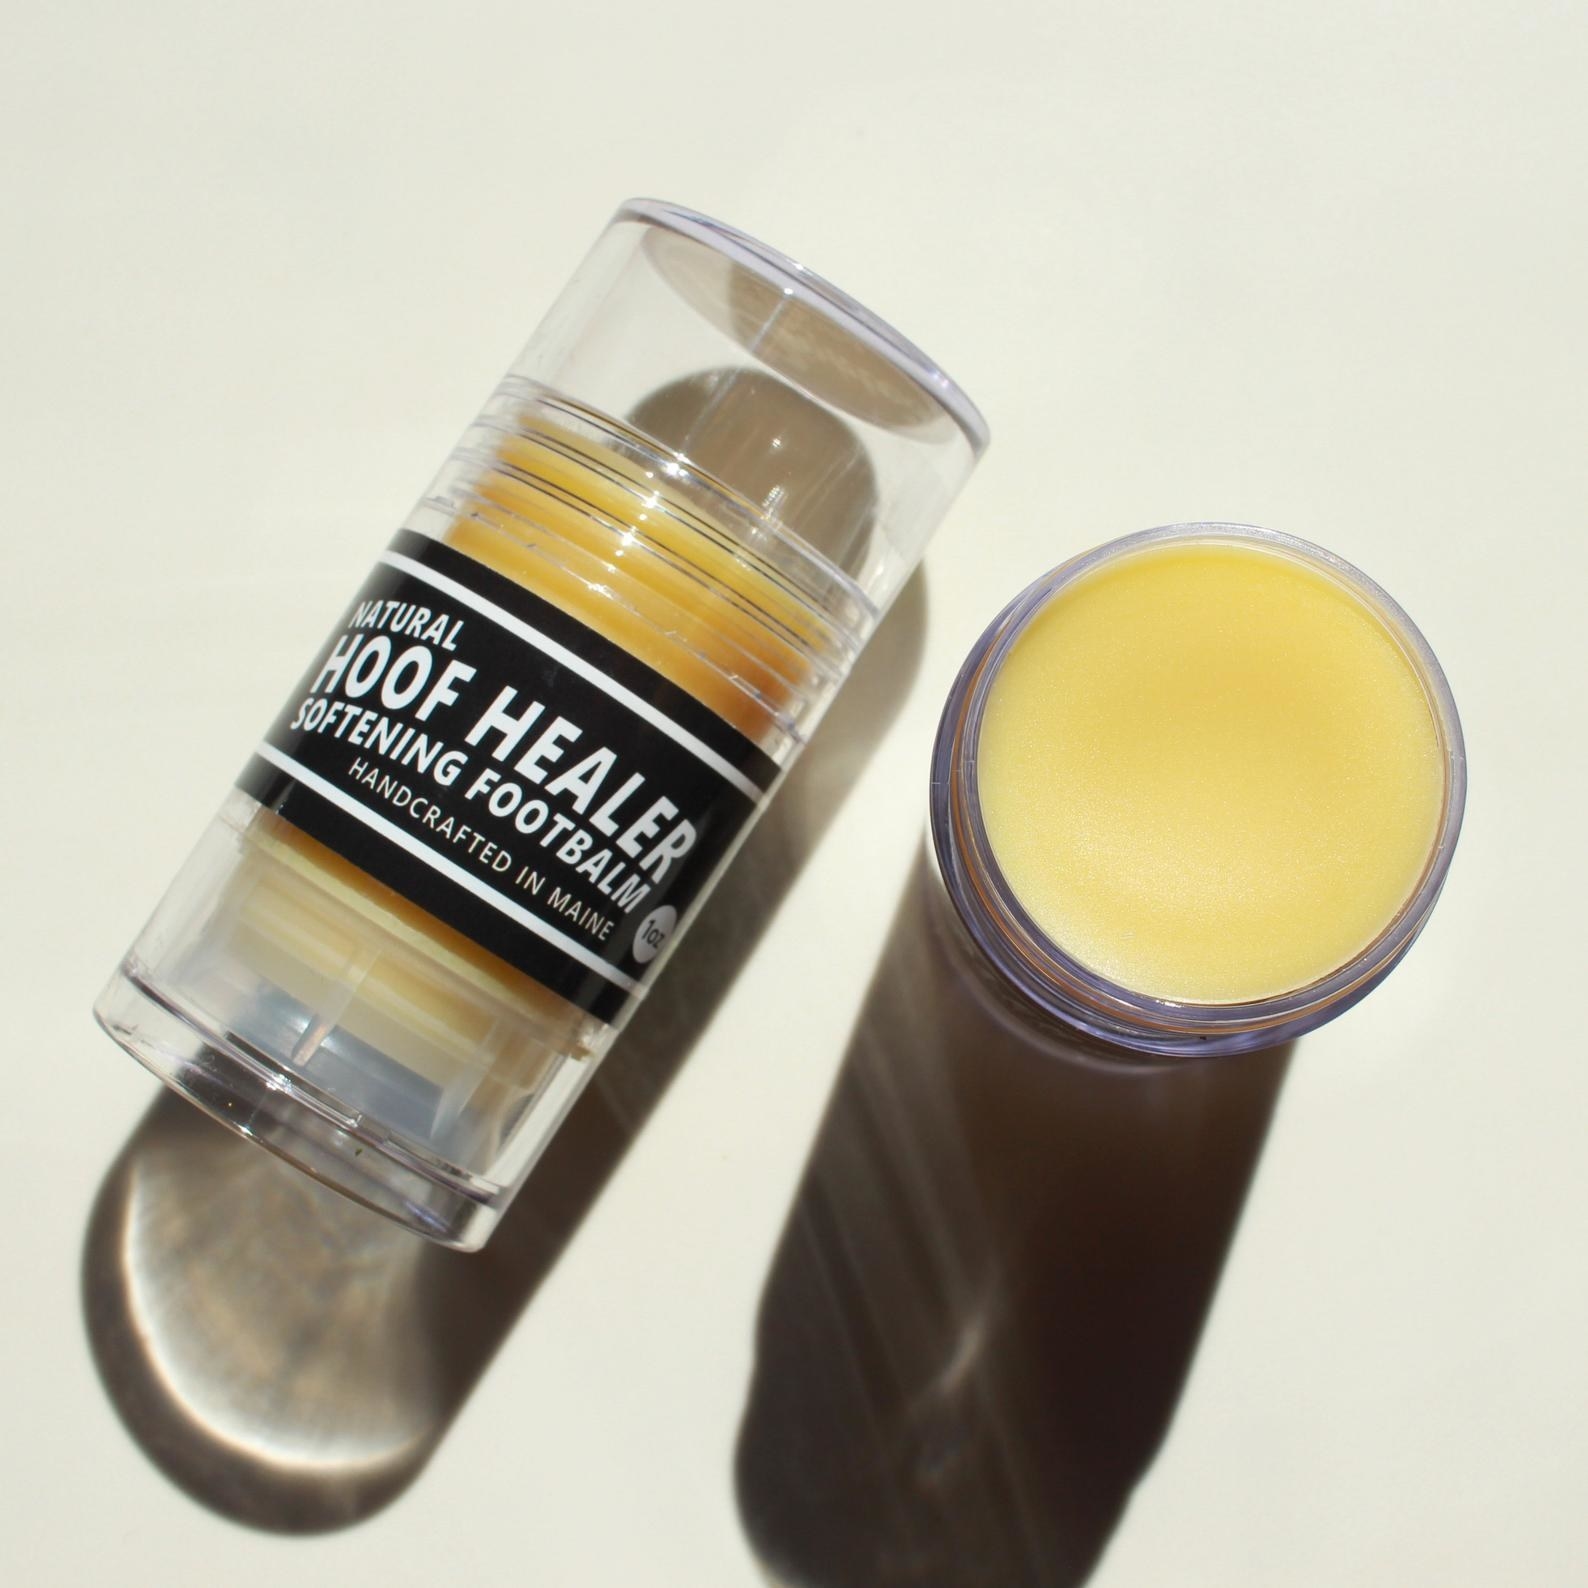 the foot balm in a deodorant-like stick